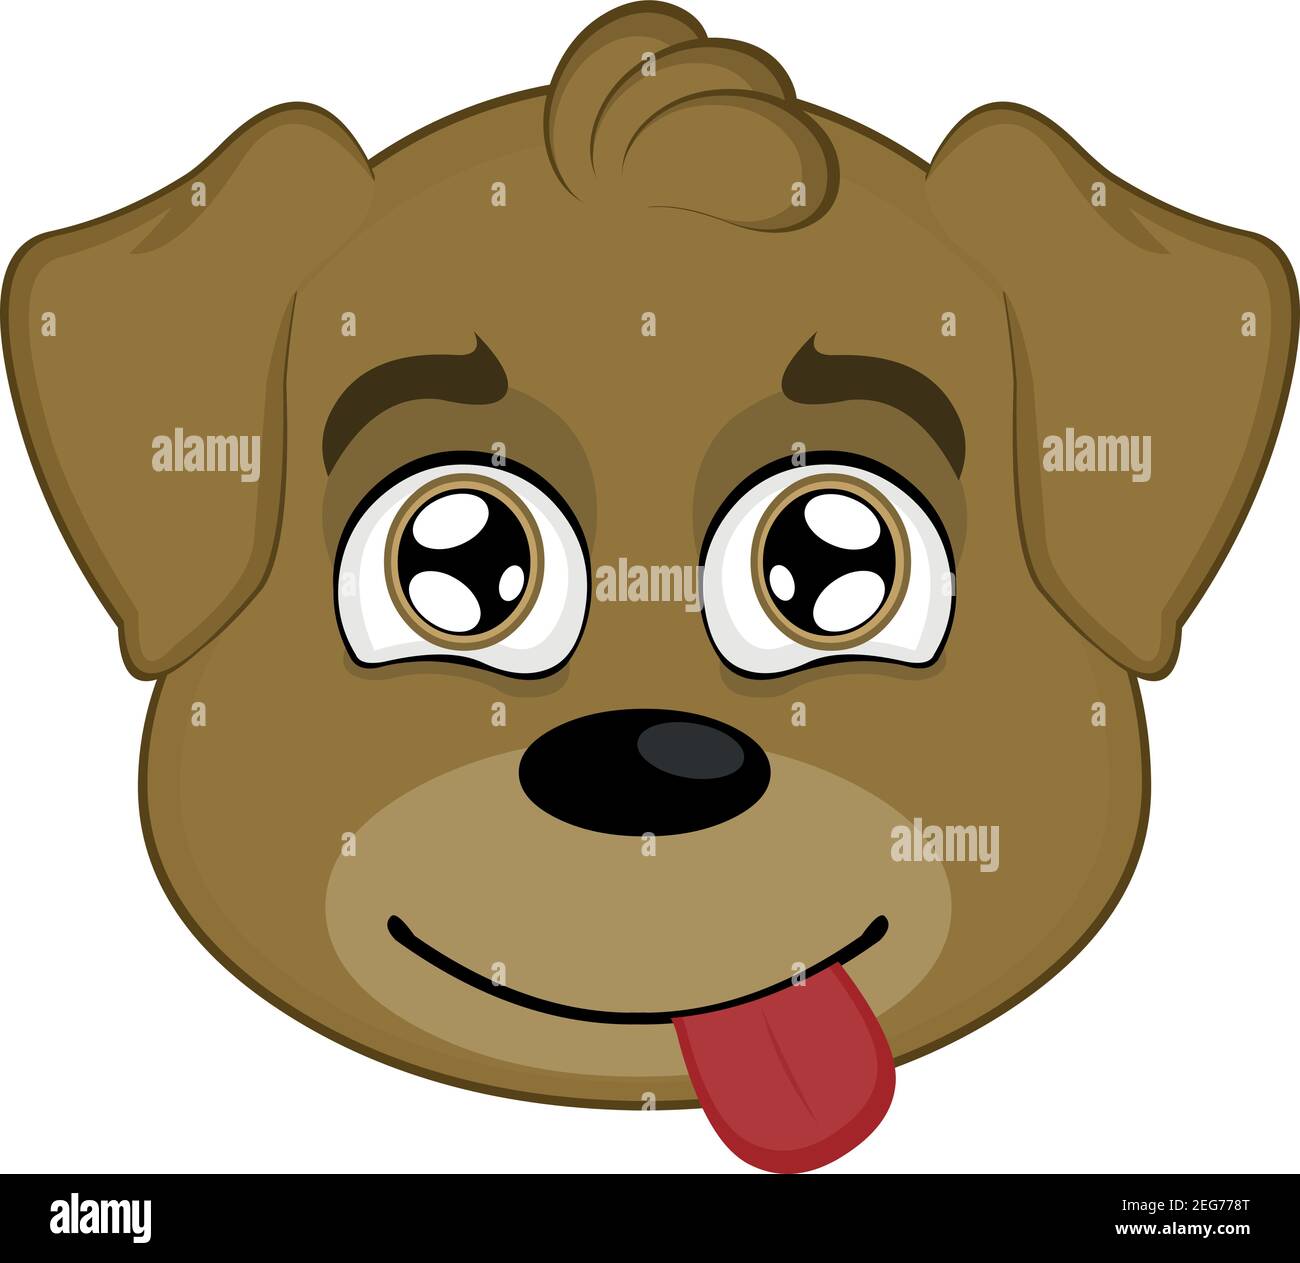 Vector emoticon illustration of a cartoon dog's face with a happy expression and tongue sticking out Stock Vector